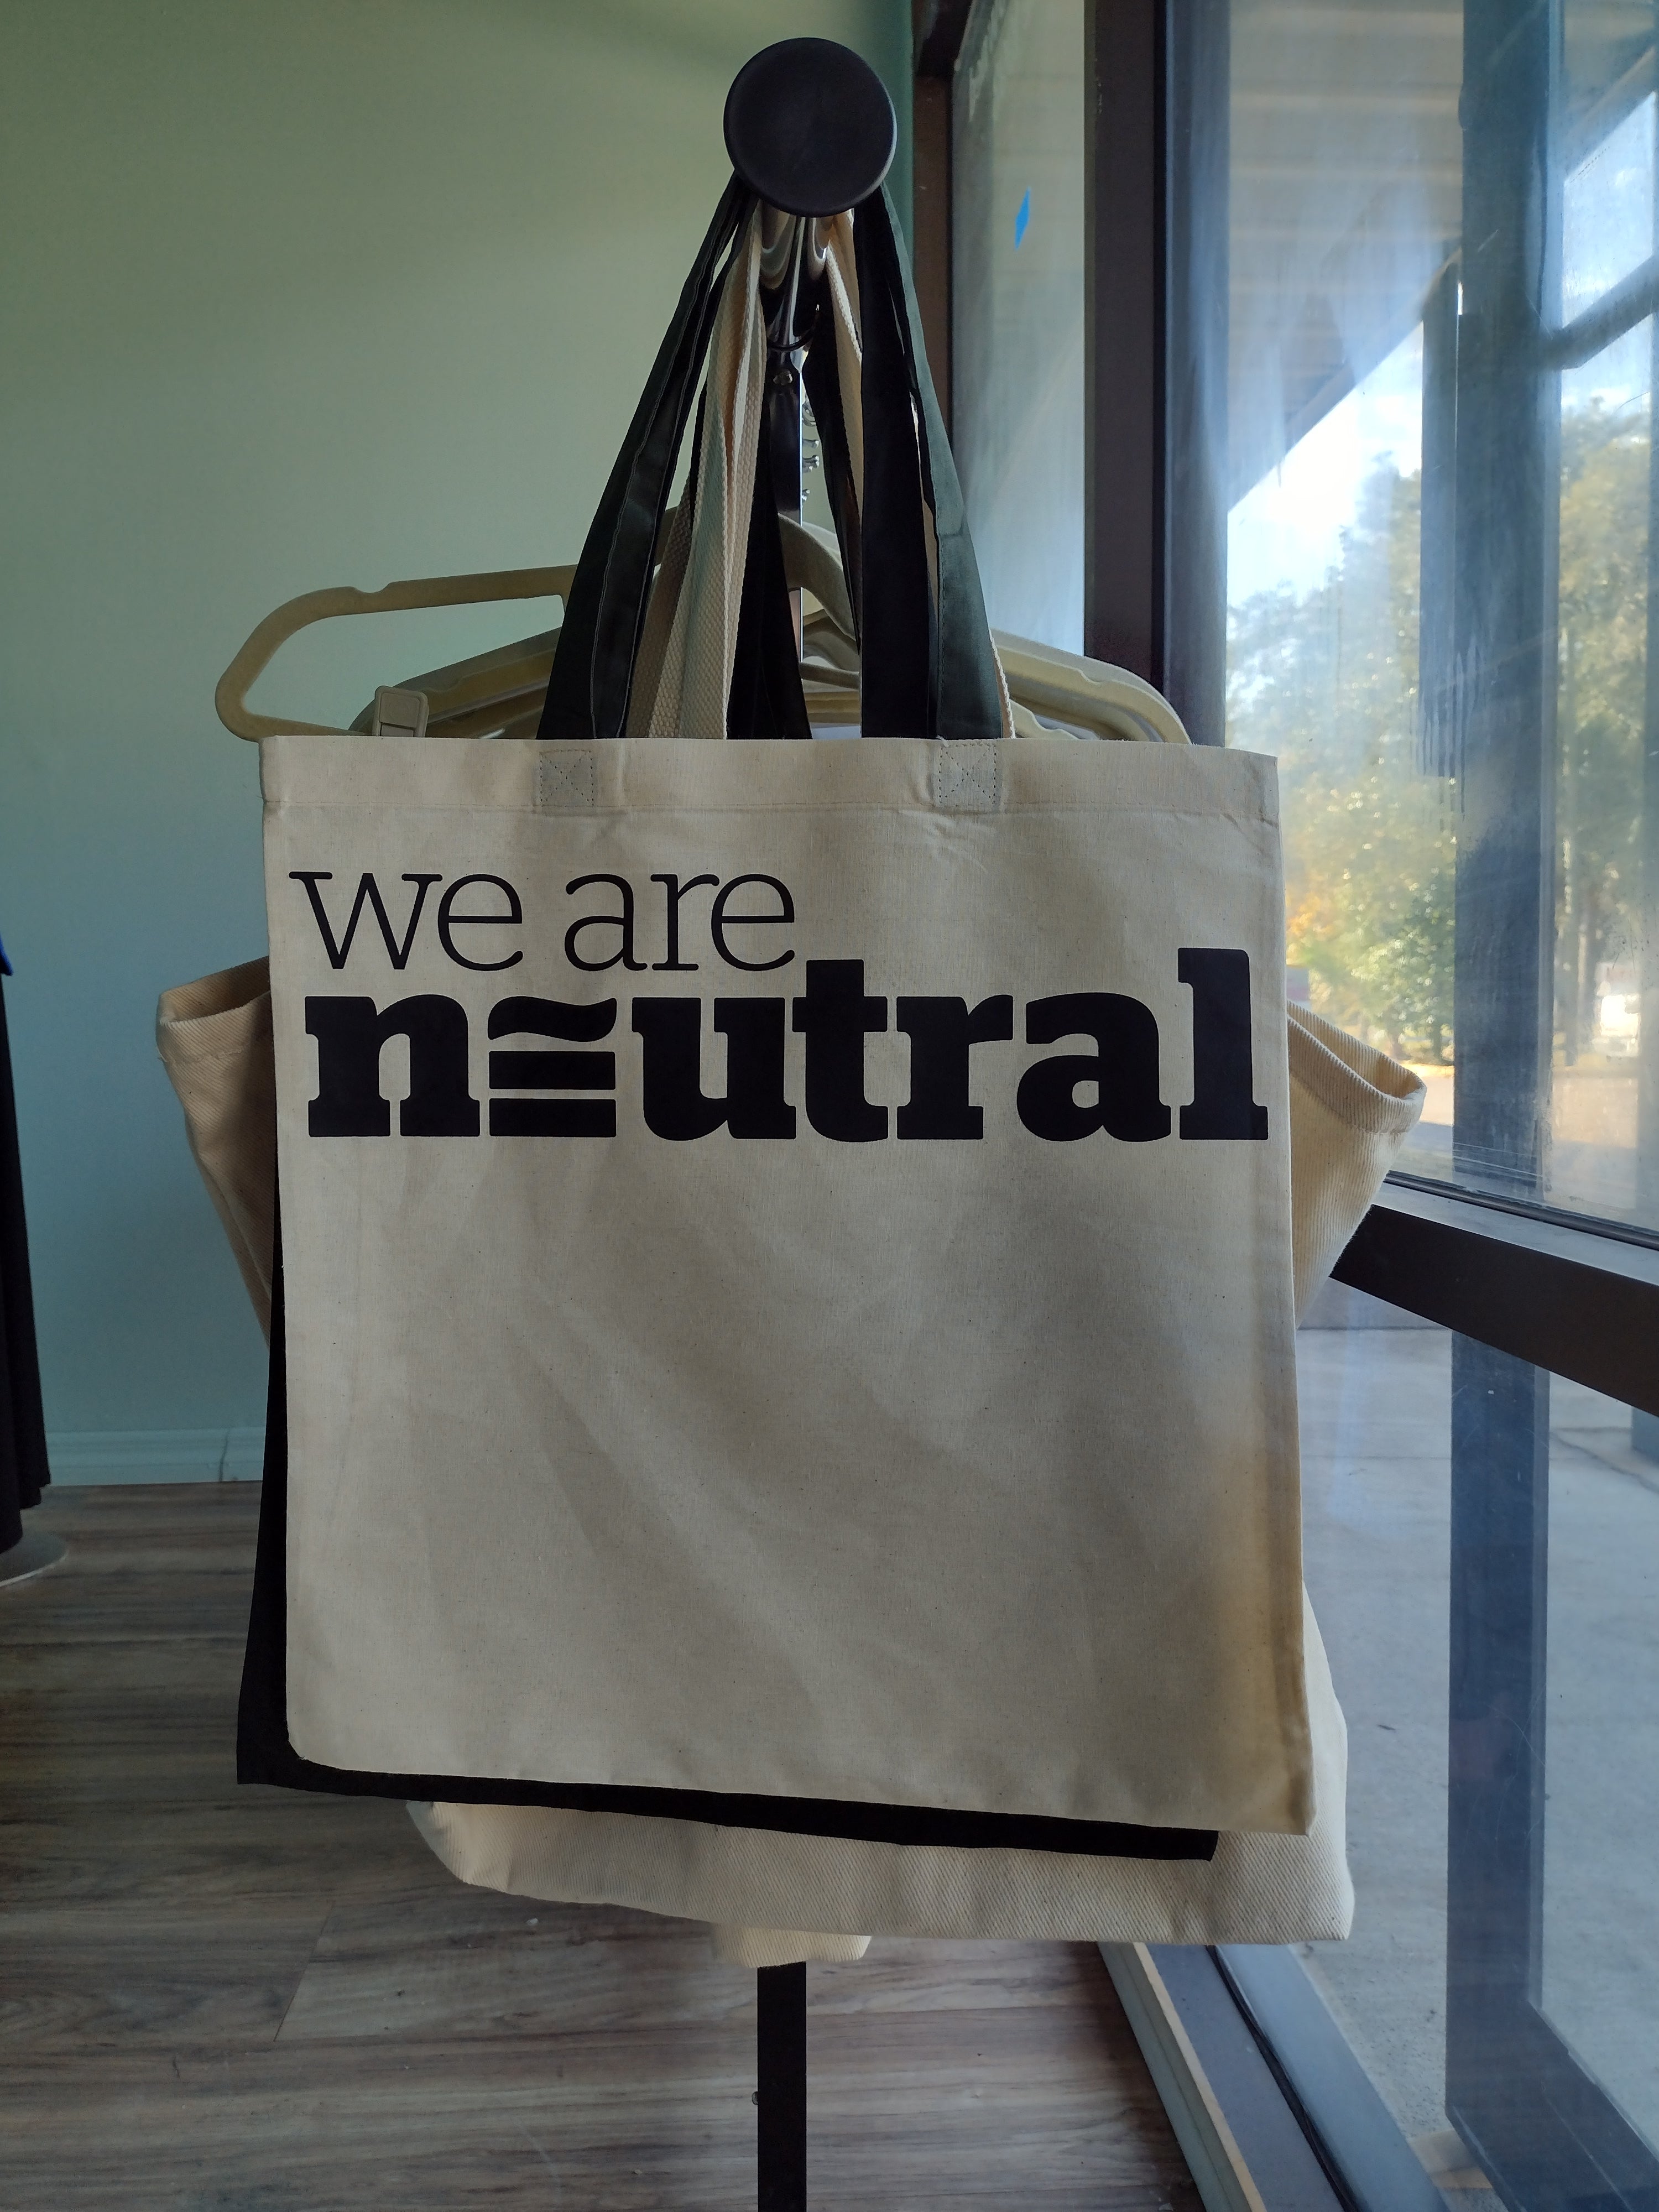 We Are Neutral tote bag